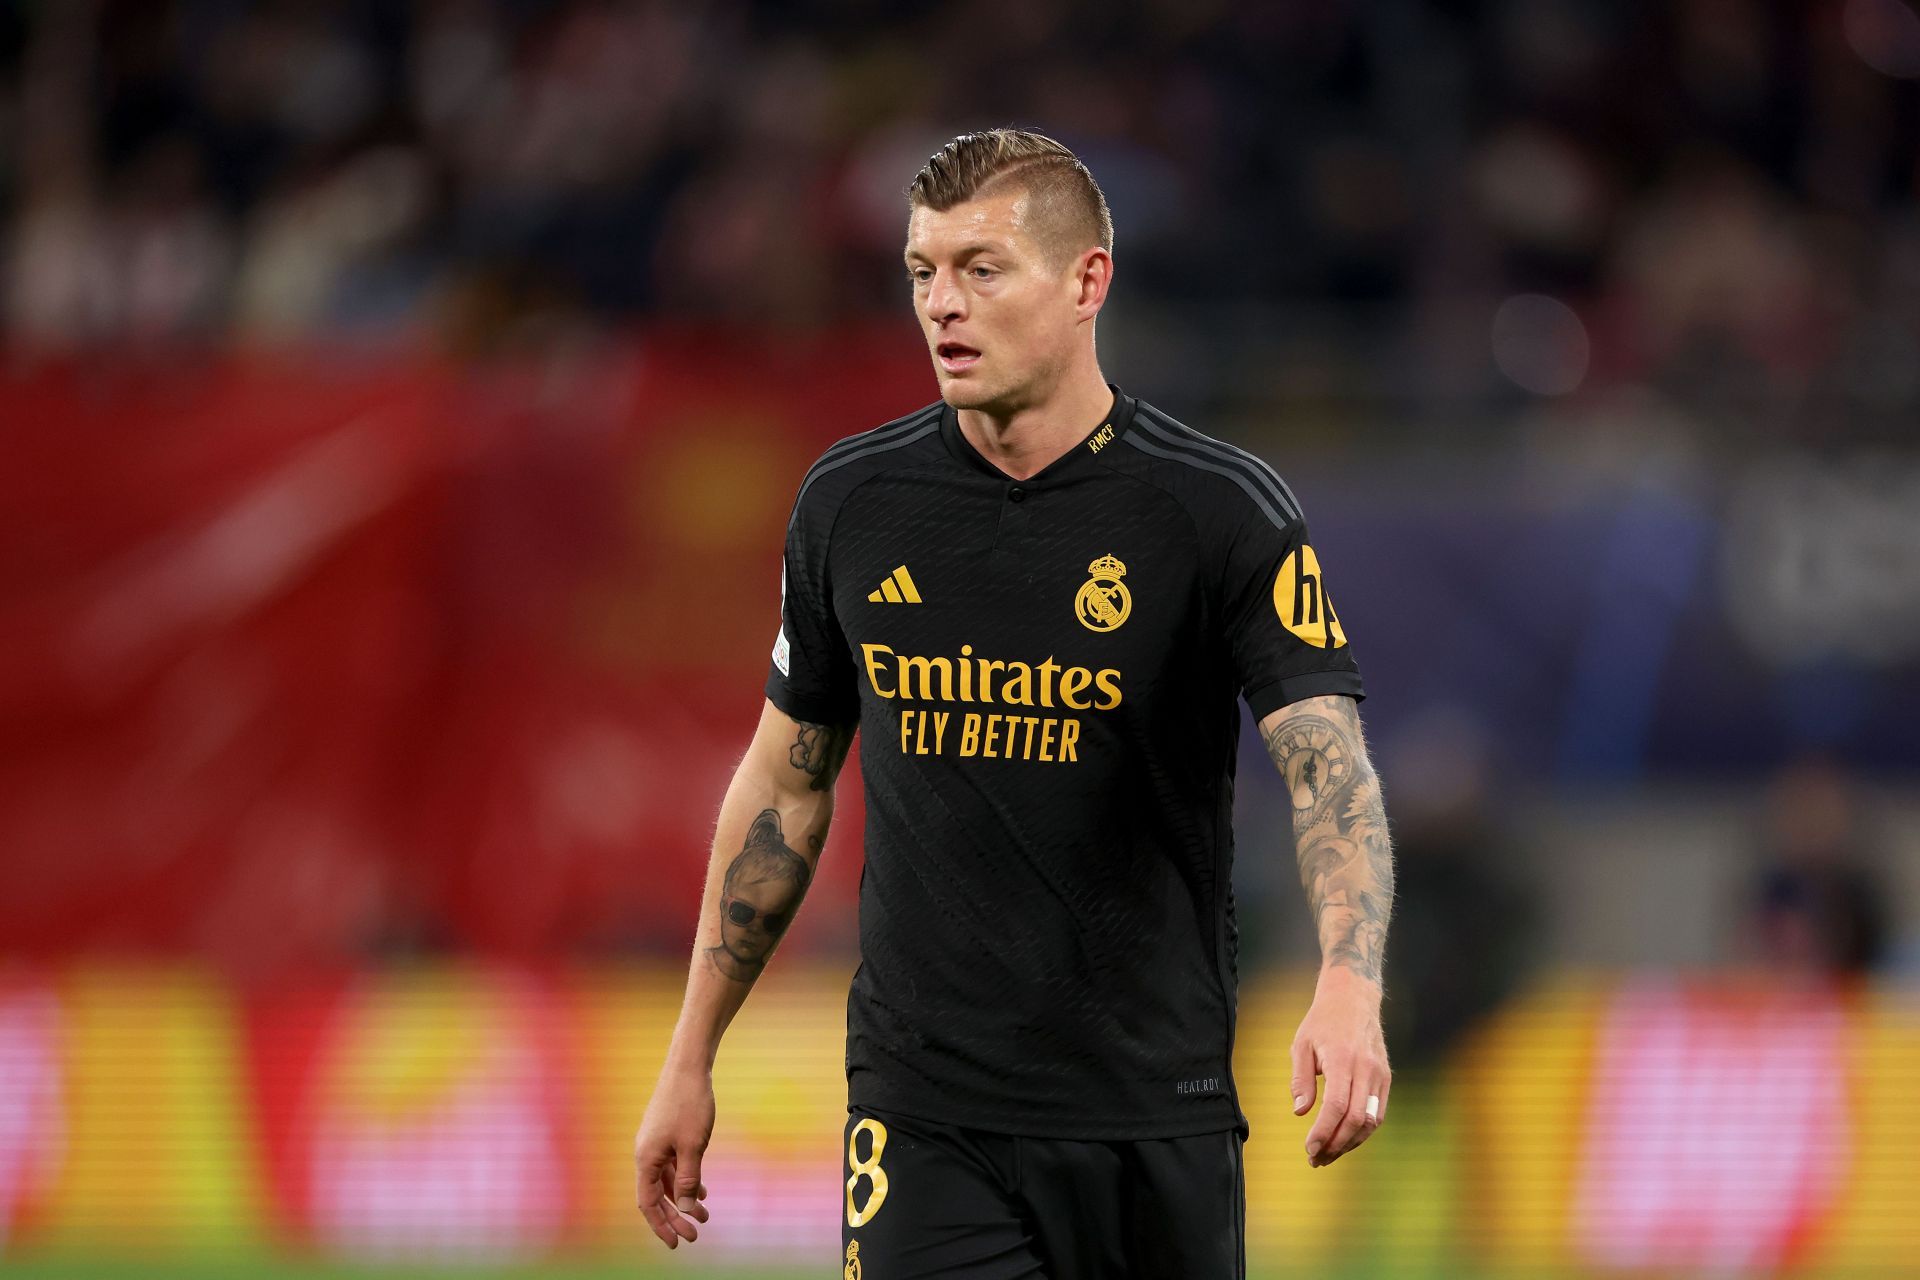 Toni Kroos&rsquo; future at the Santiago Bernabeu remains up in the air.